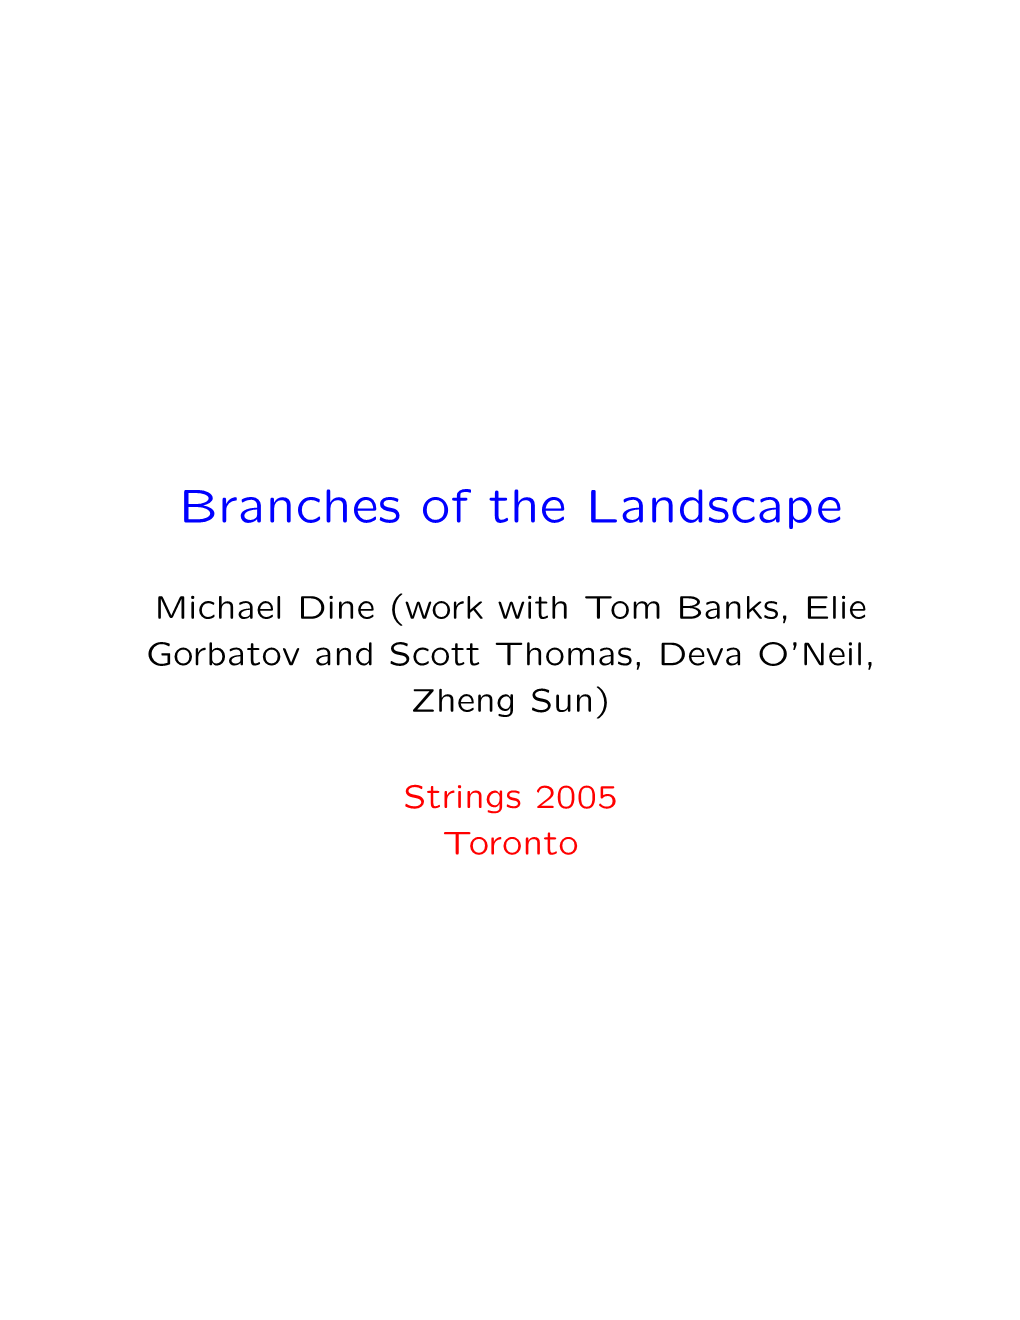 Branches of the Landscape